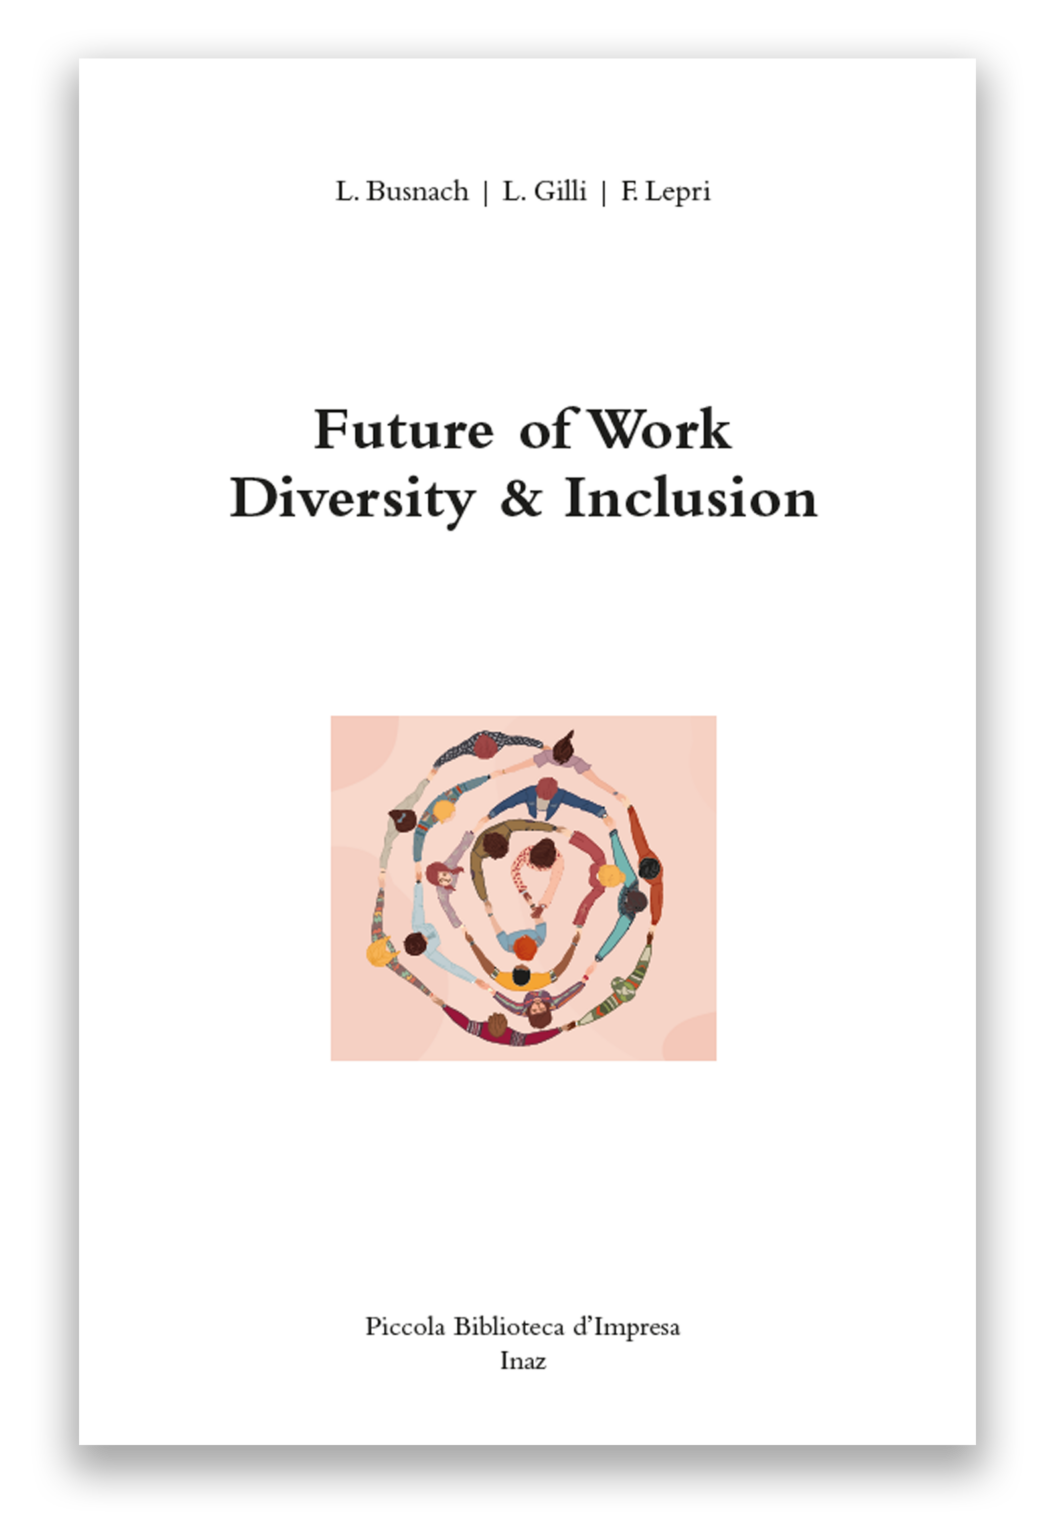 Future of work - Diversity & Inclusion